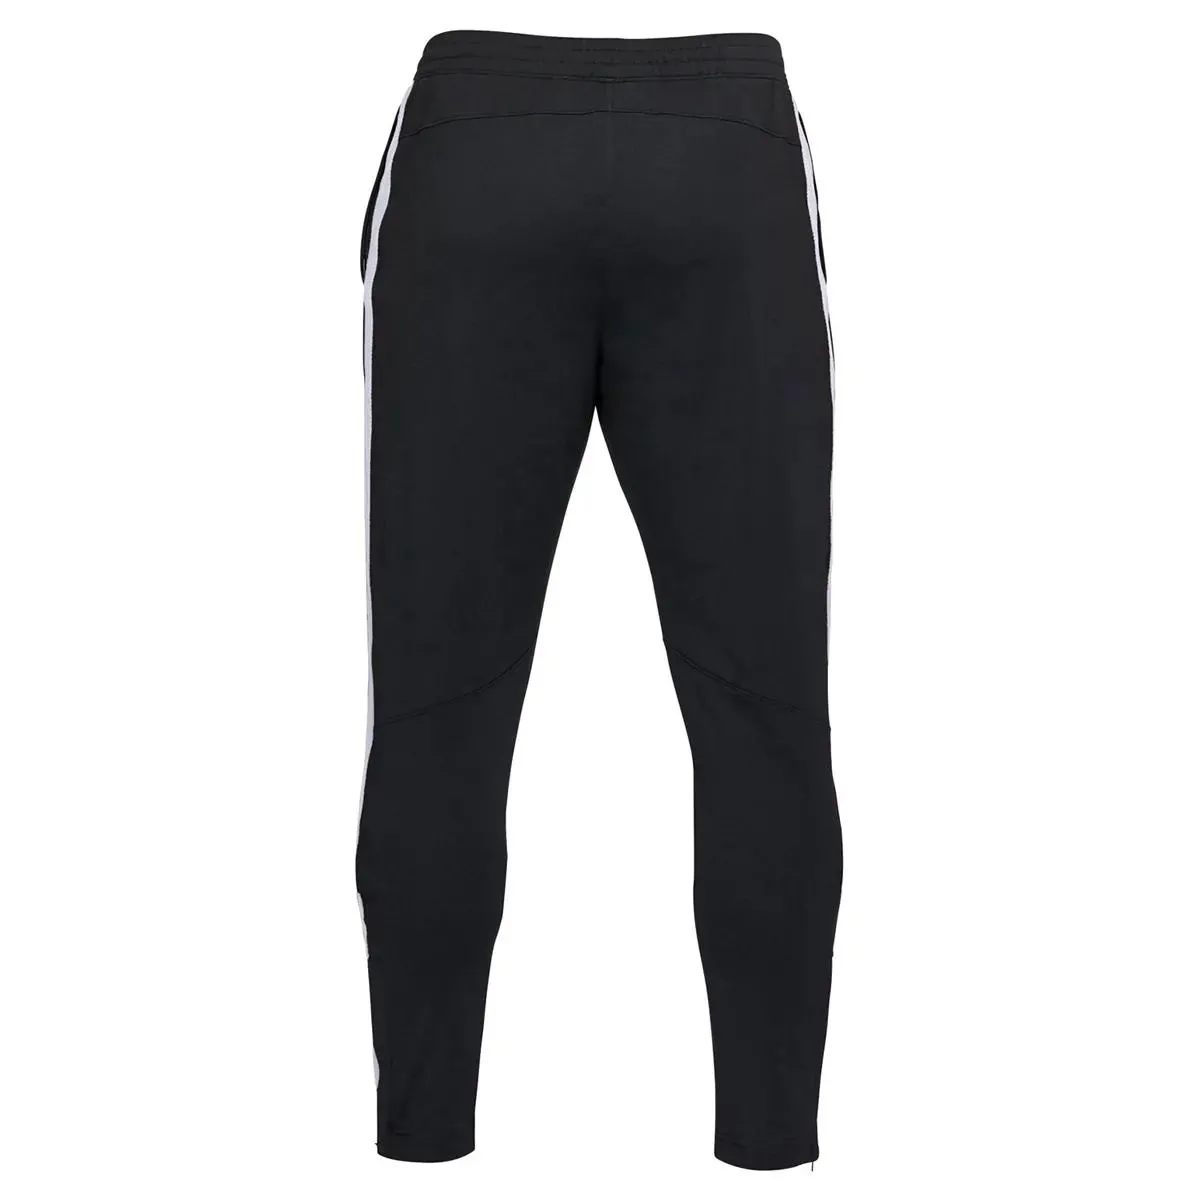 Under Armour Hlače SPORTSTYLE PIQUE TRACK PANT 